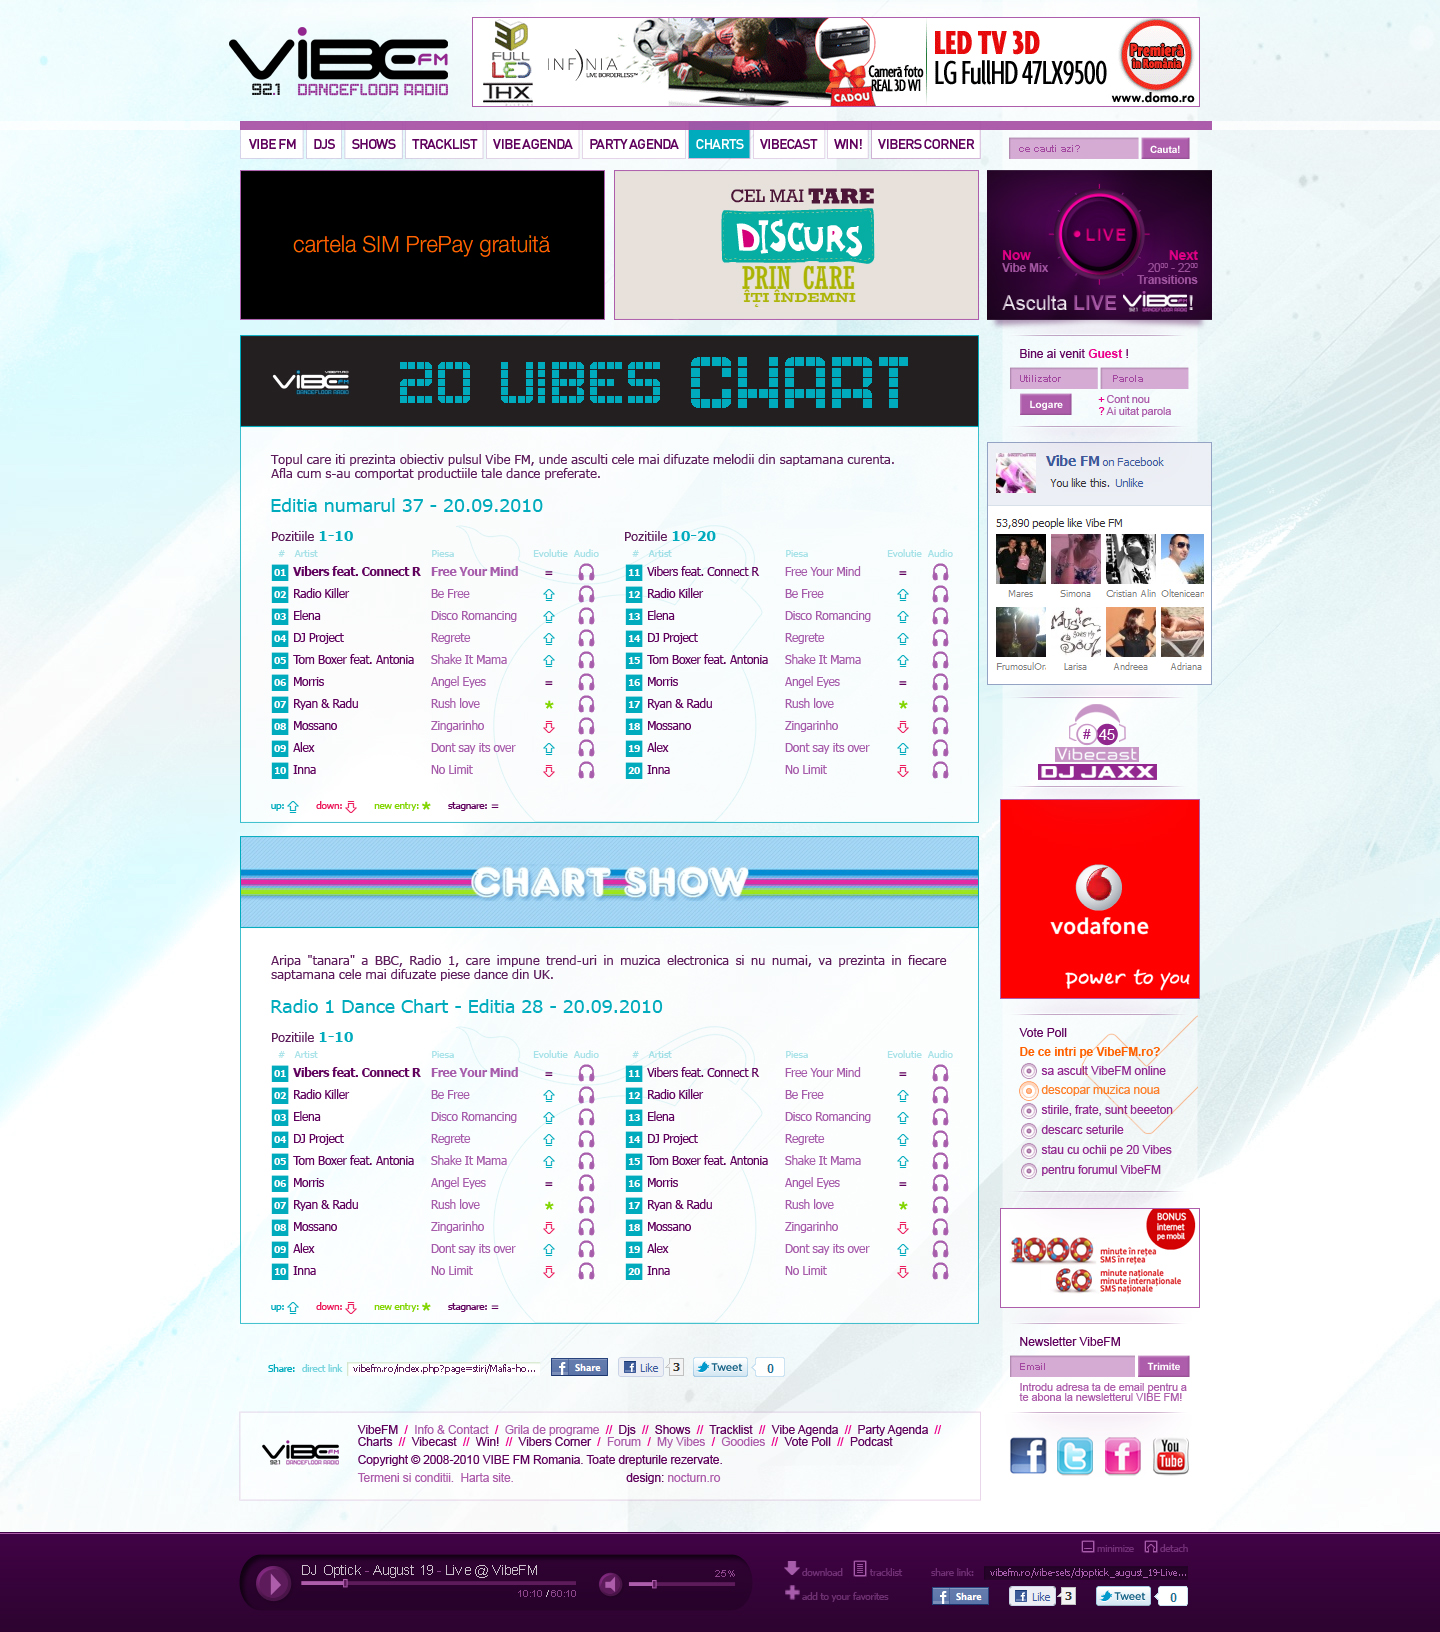 Vibe FM electronic dance music radio station website layout design by Utopia branding agency